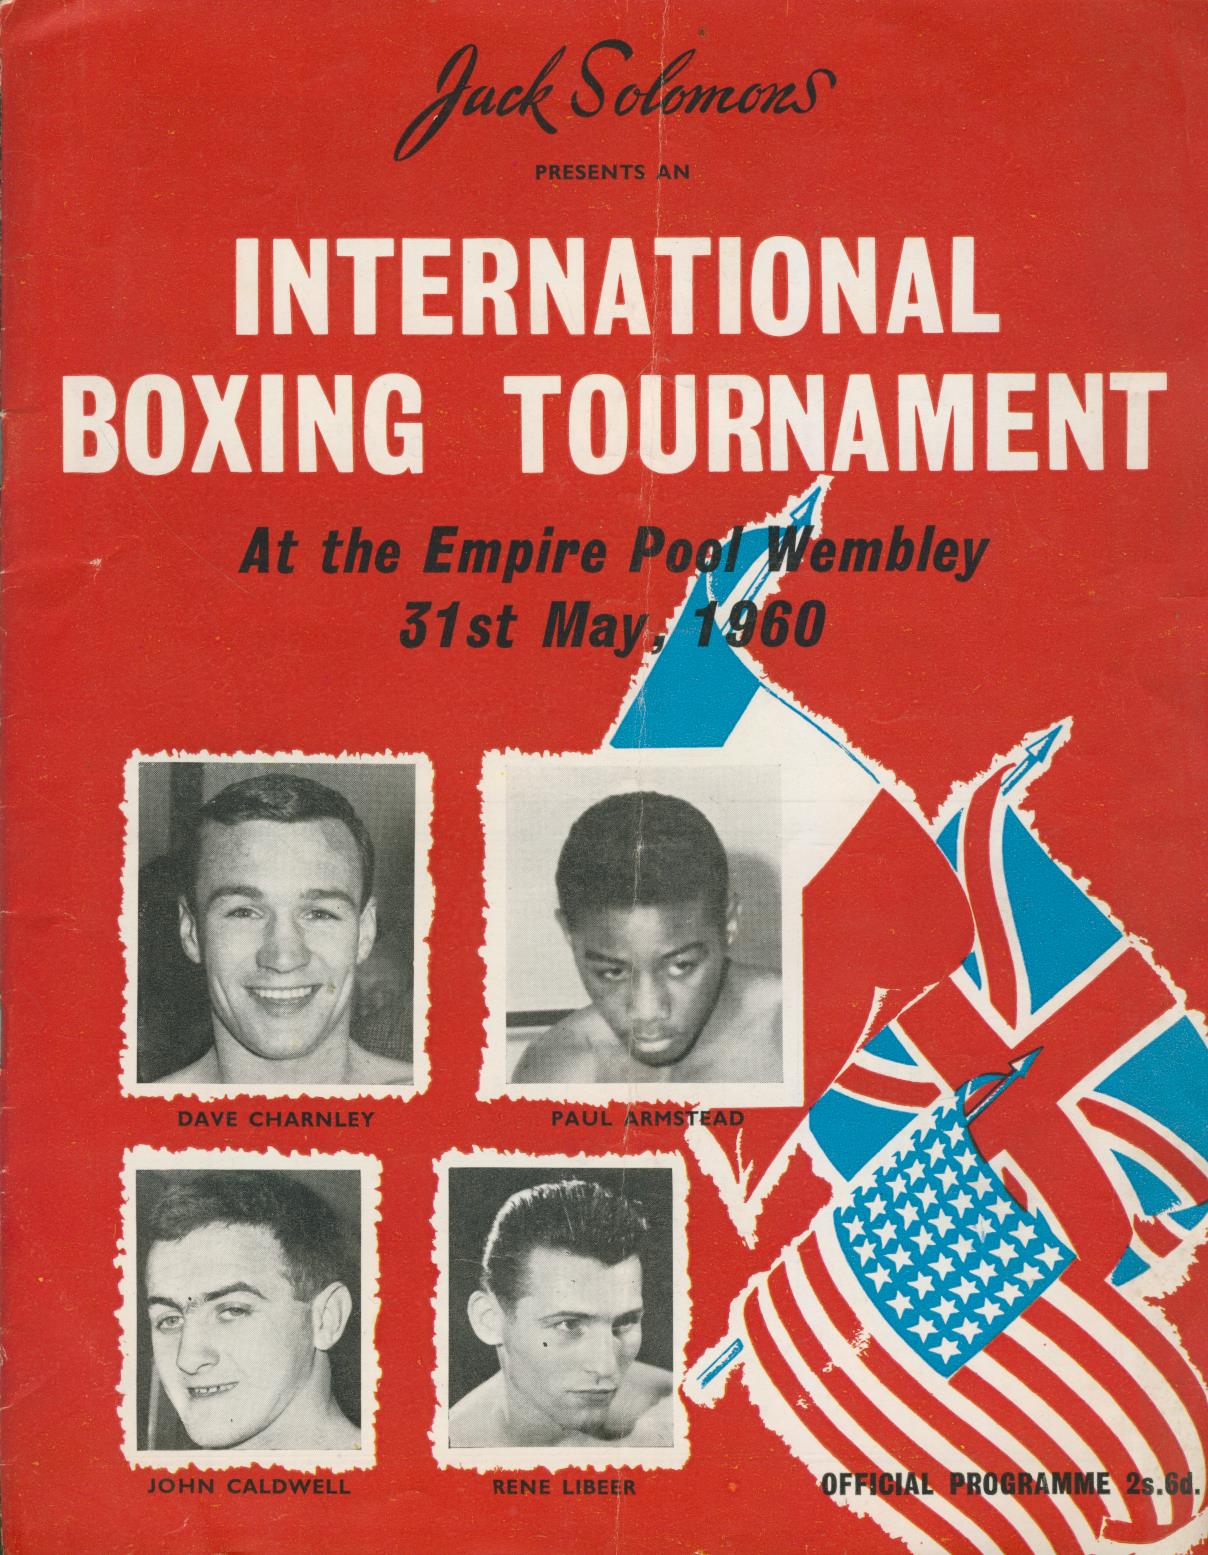 DAVE CHARNLEY V PAUL ARMSTEAD 1960 BOXING PROGRAMME - Boxing programmes ...